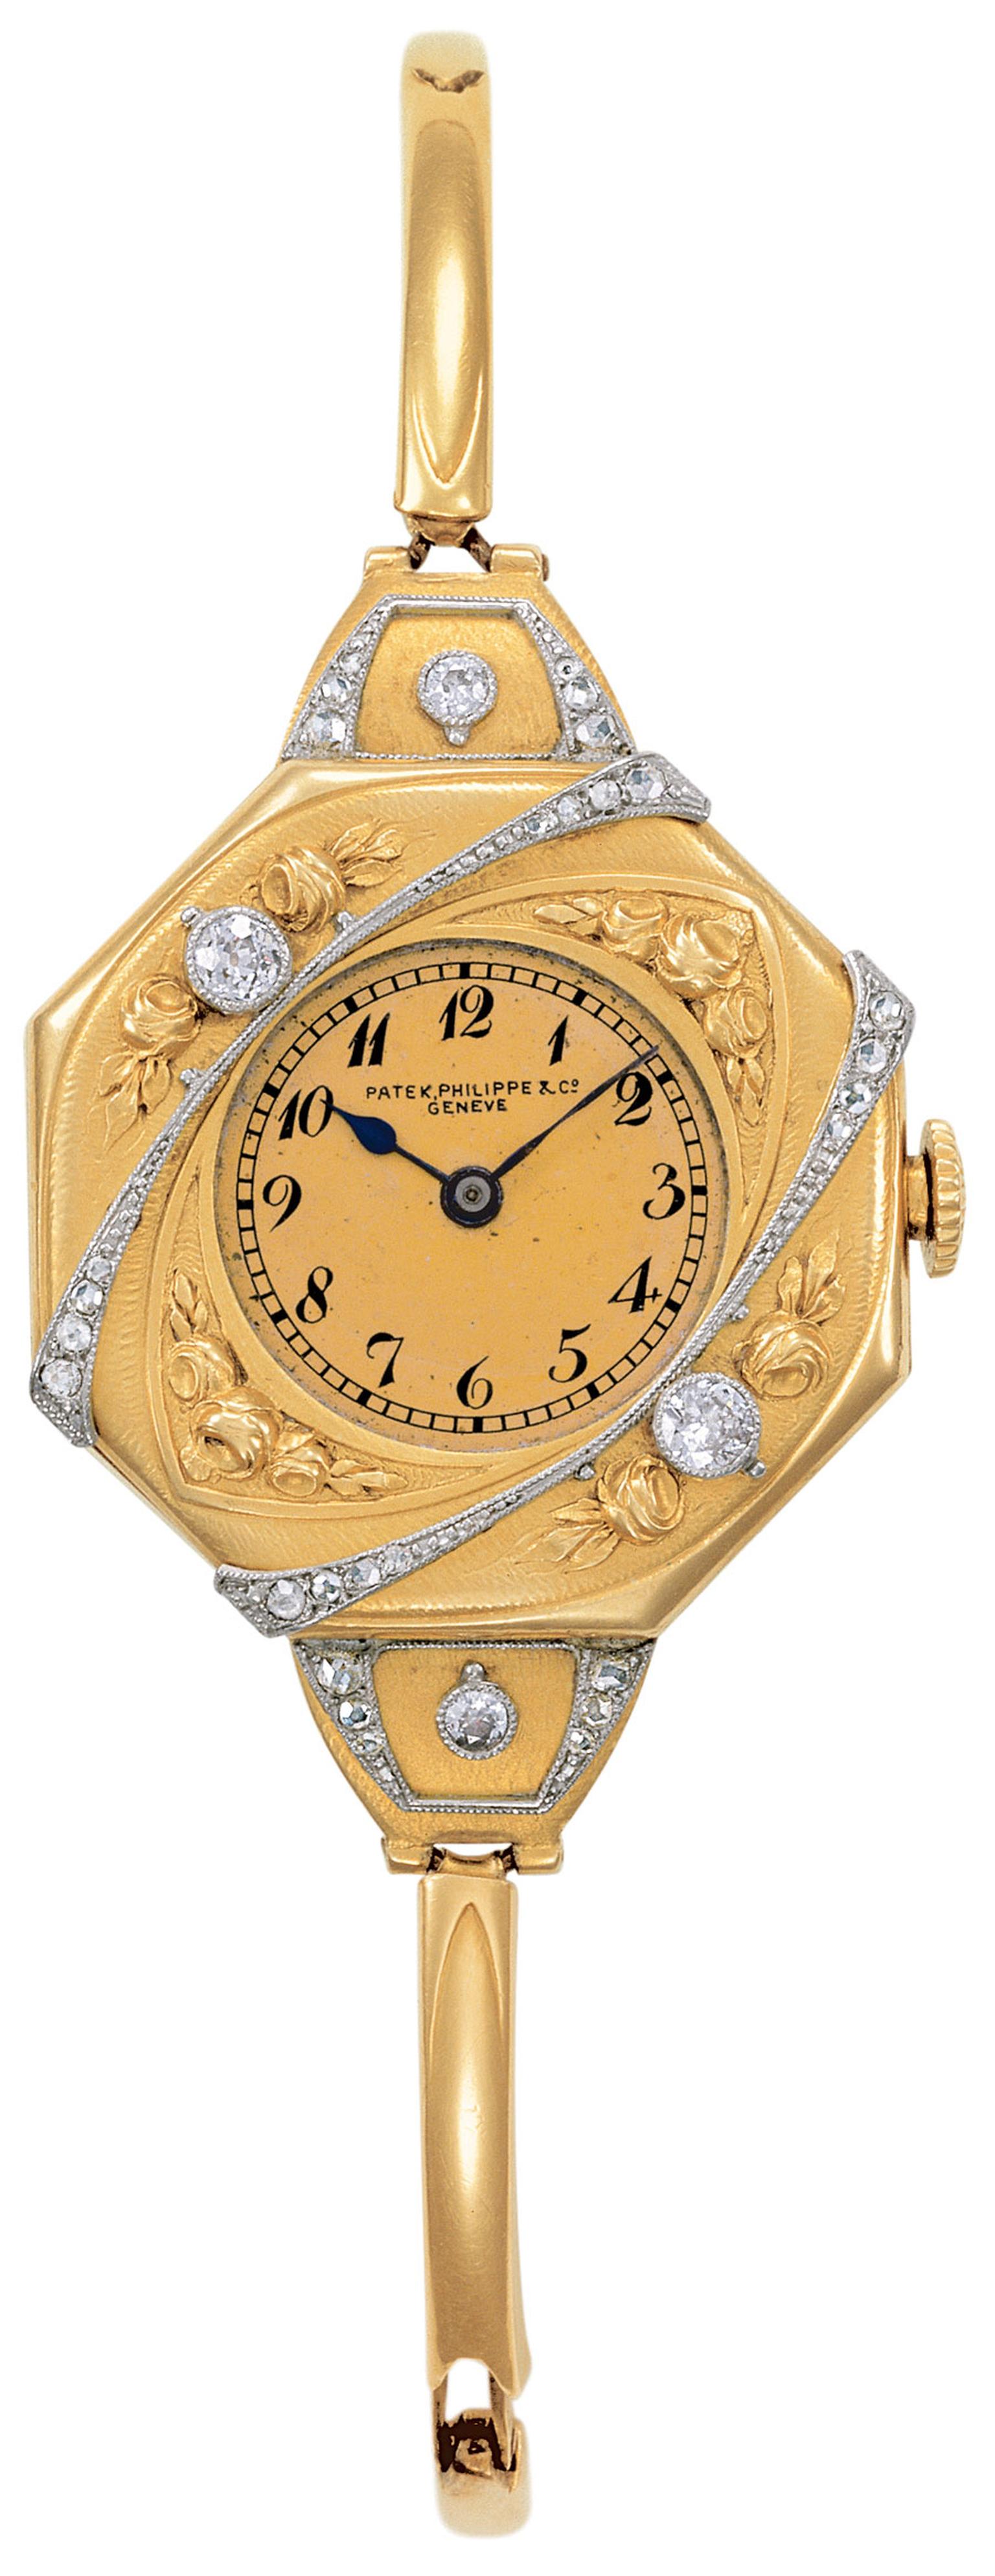 Patek-Philippe-P1202_a_200_collection-1910-15.jpg